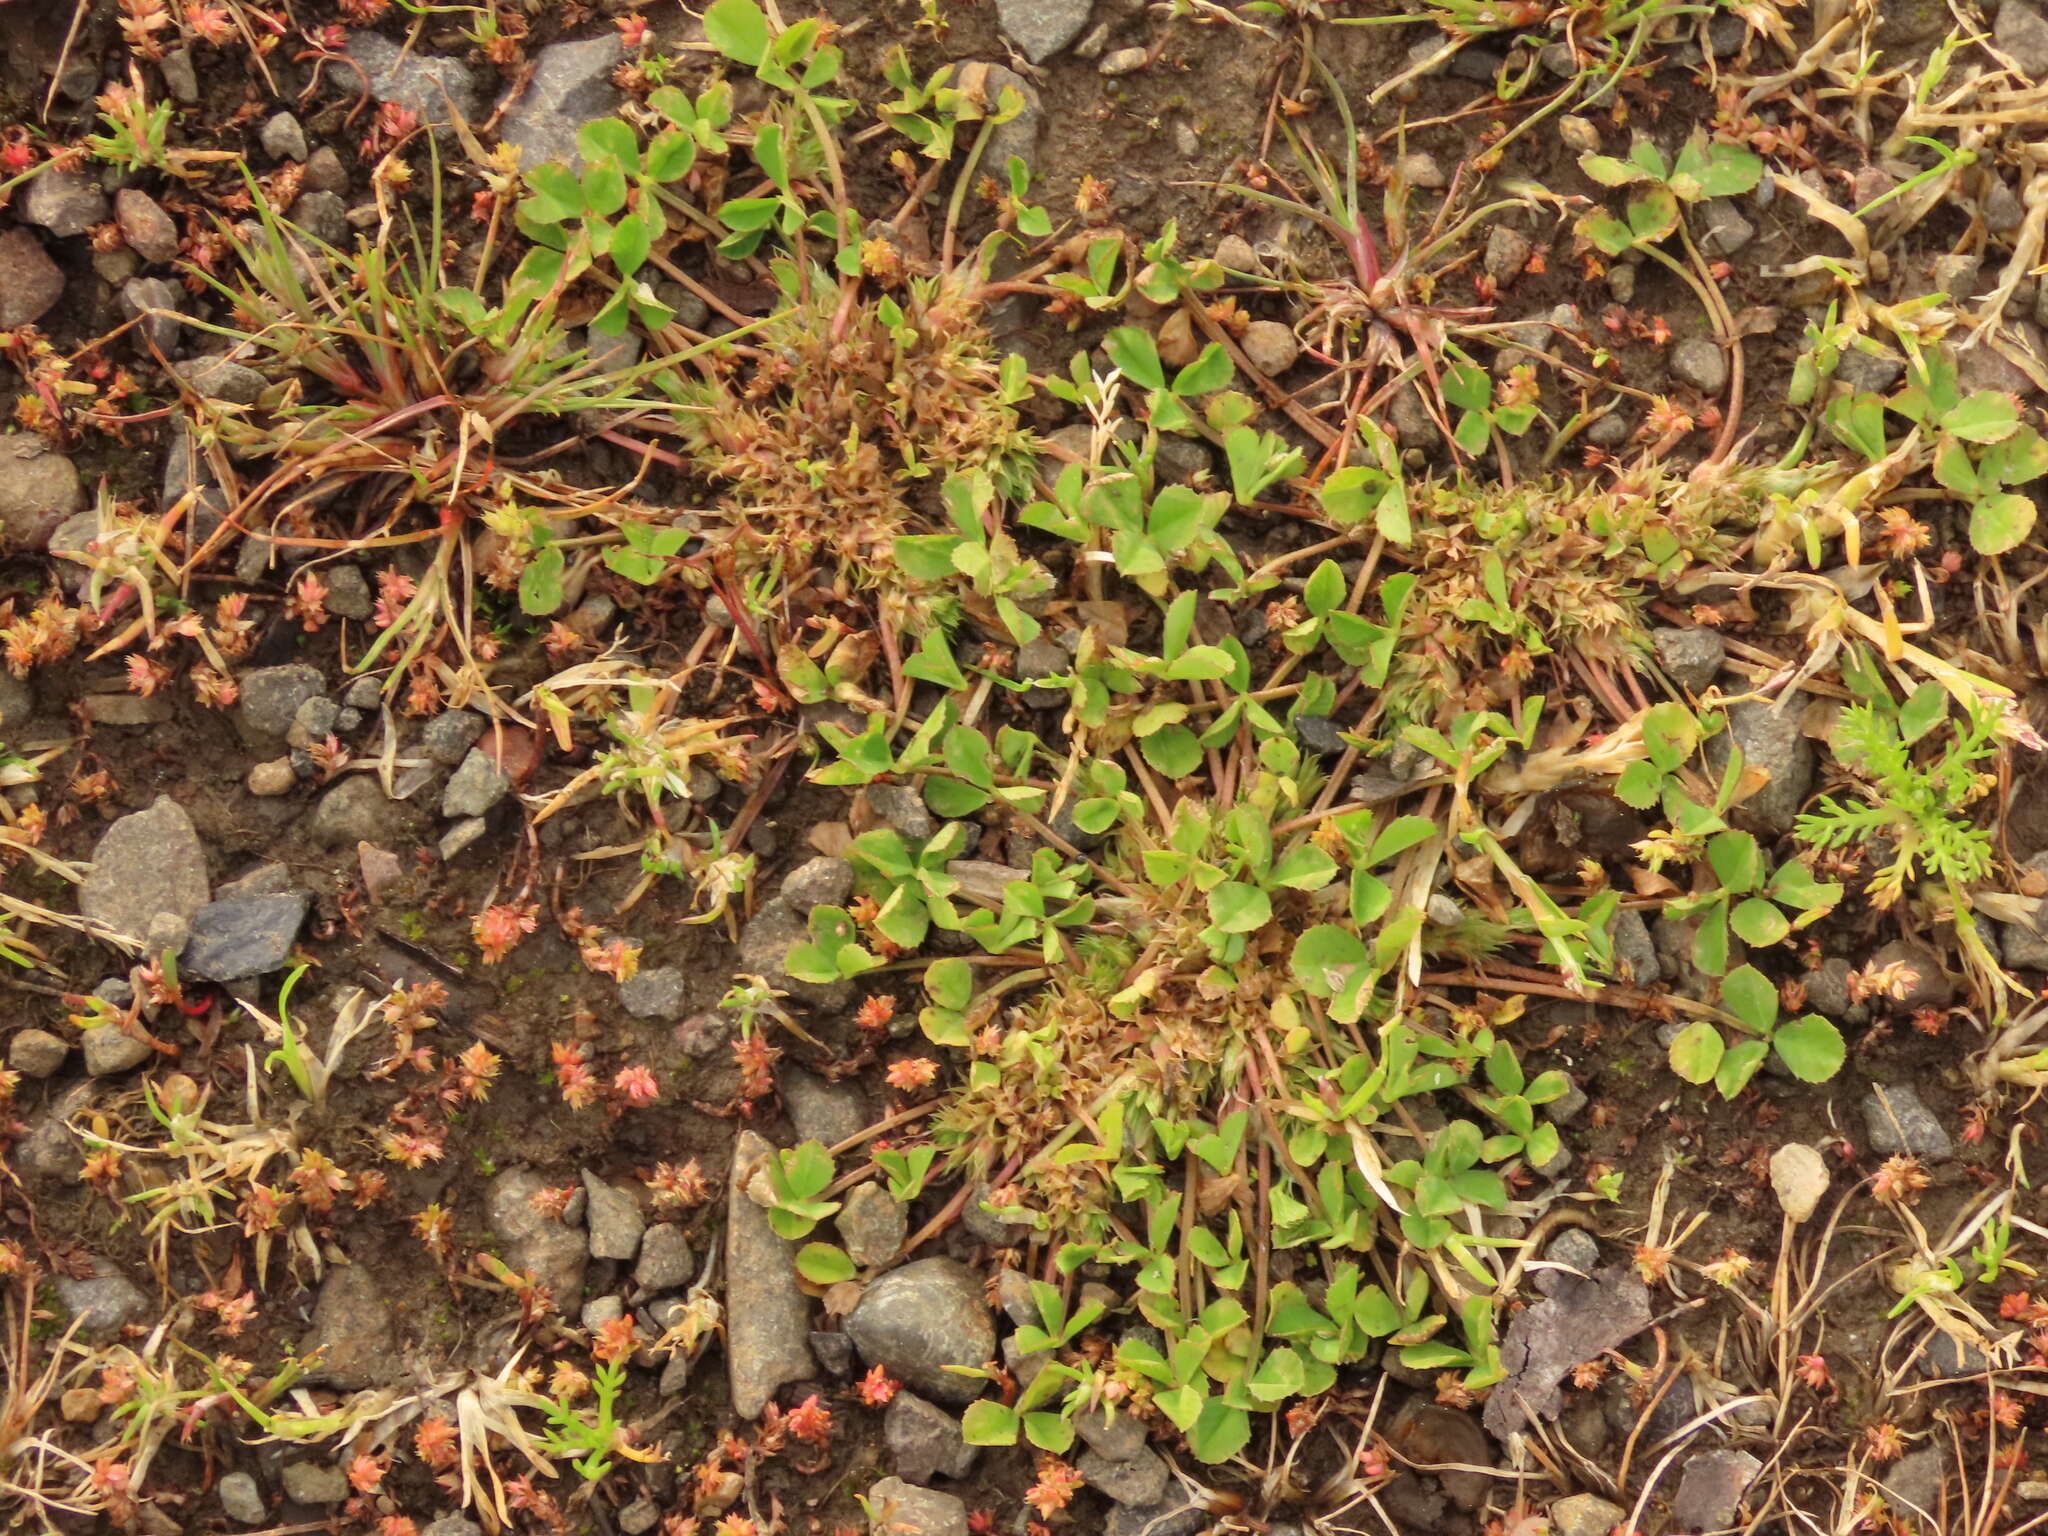 Image of suffocating clover